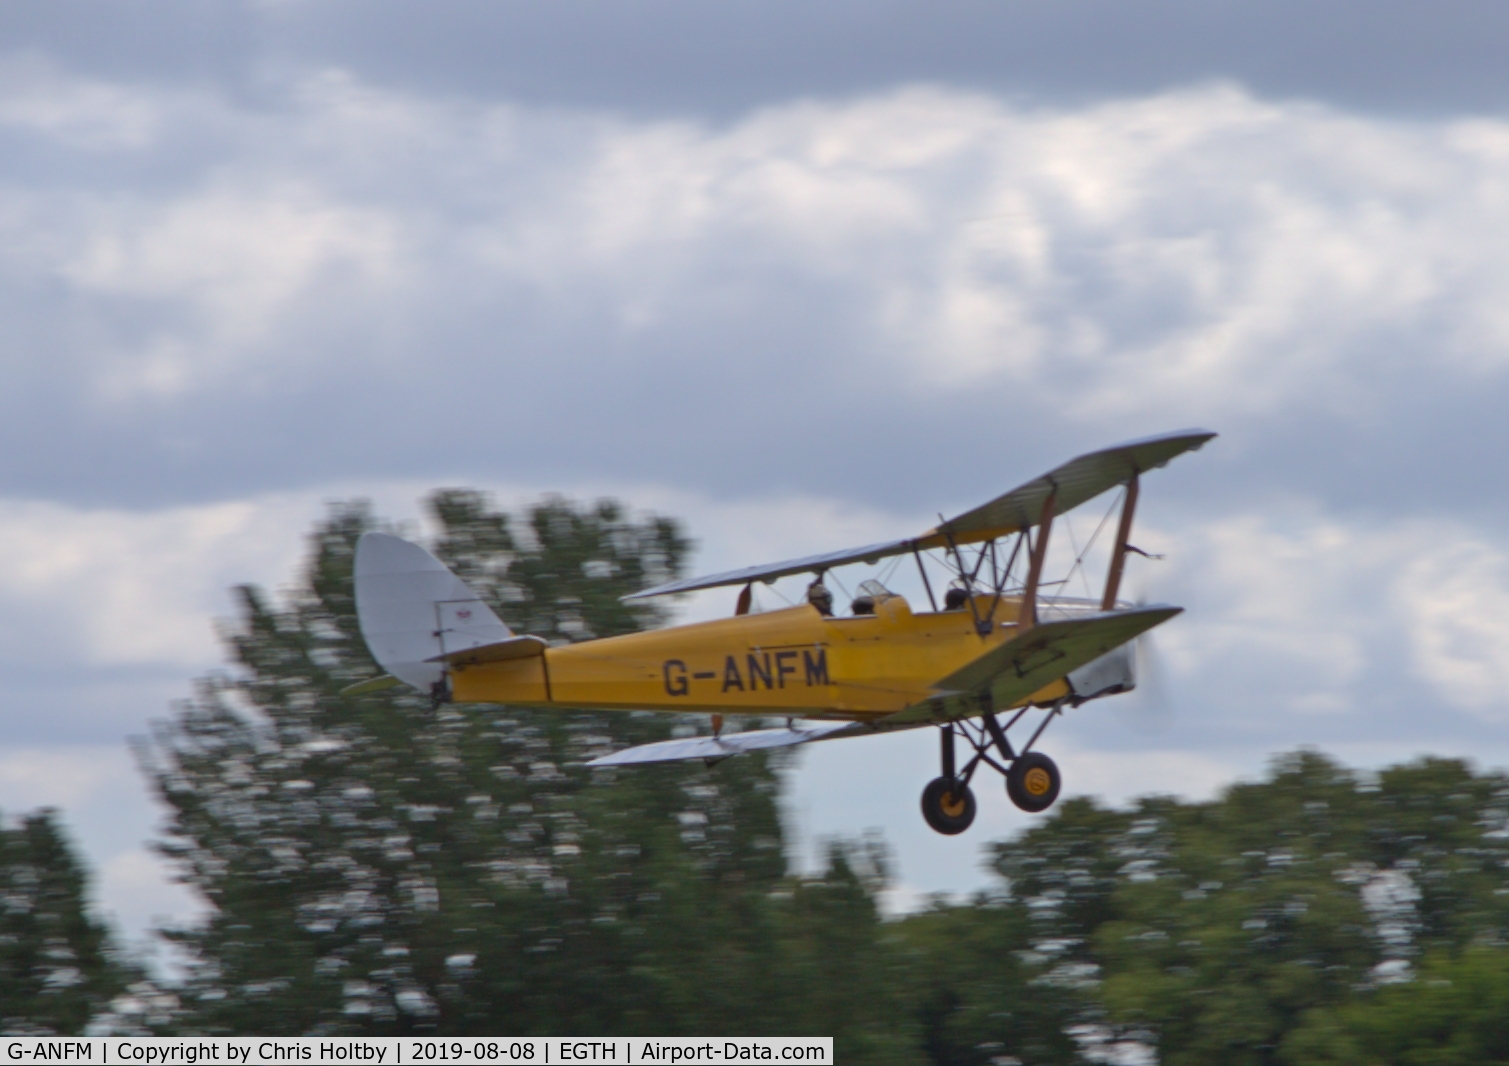 G-ANFM, 1941 De Havilland DH-82A Tiger Moth II C/N 83604, 1941 Tiger Moth taking off at the Gathering of Moths Day 2019 at Old Warden